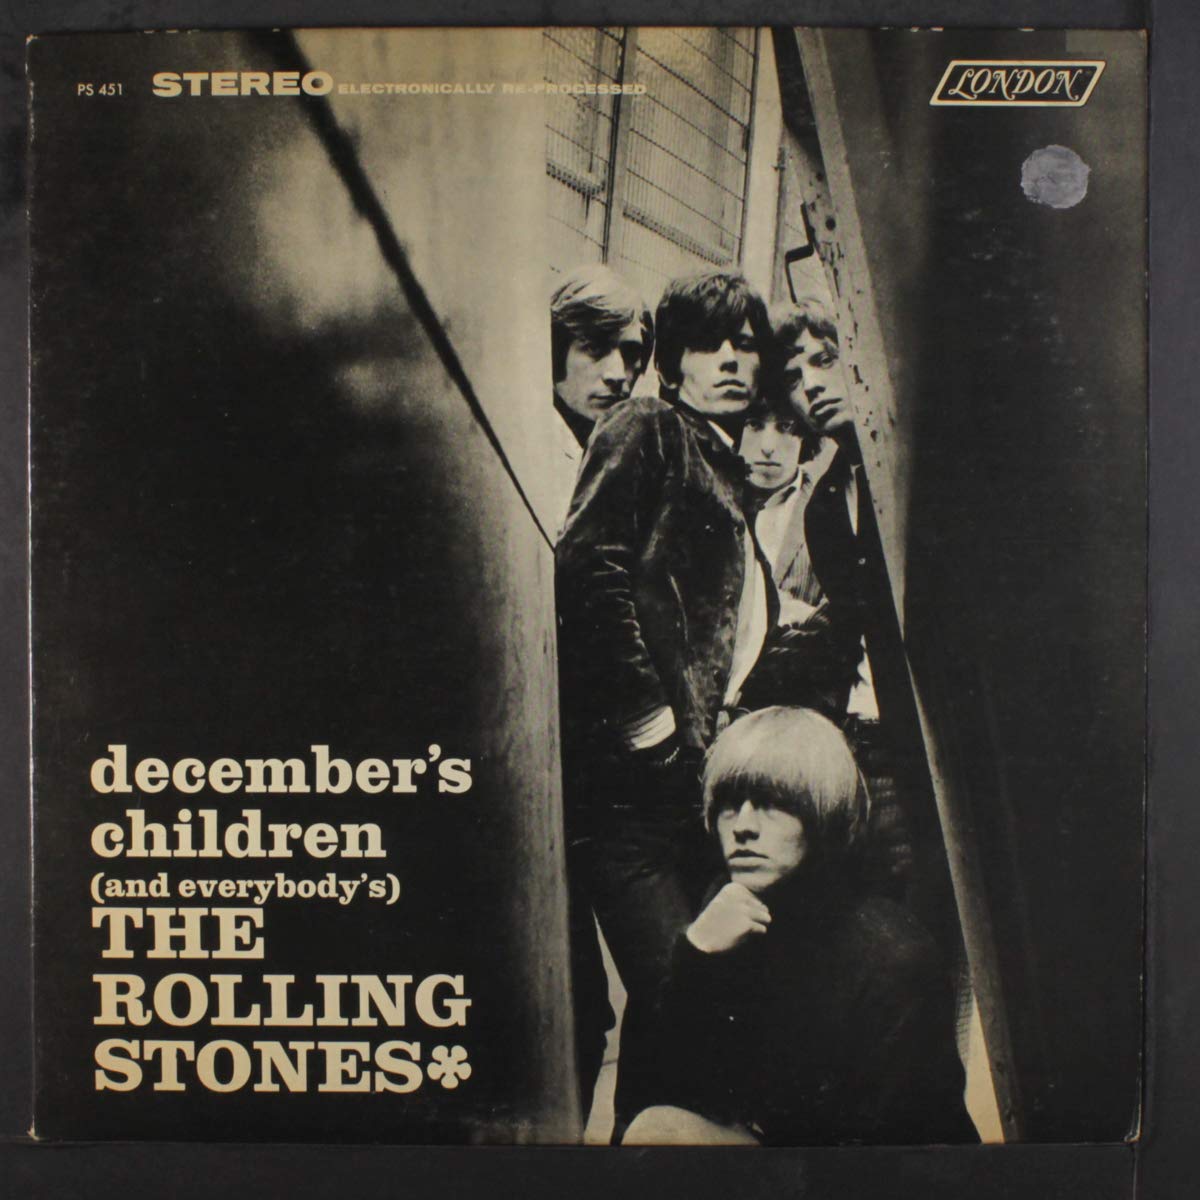 The Rolling stones - December's children (and everybody's)